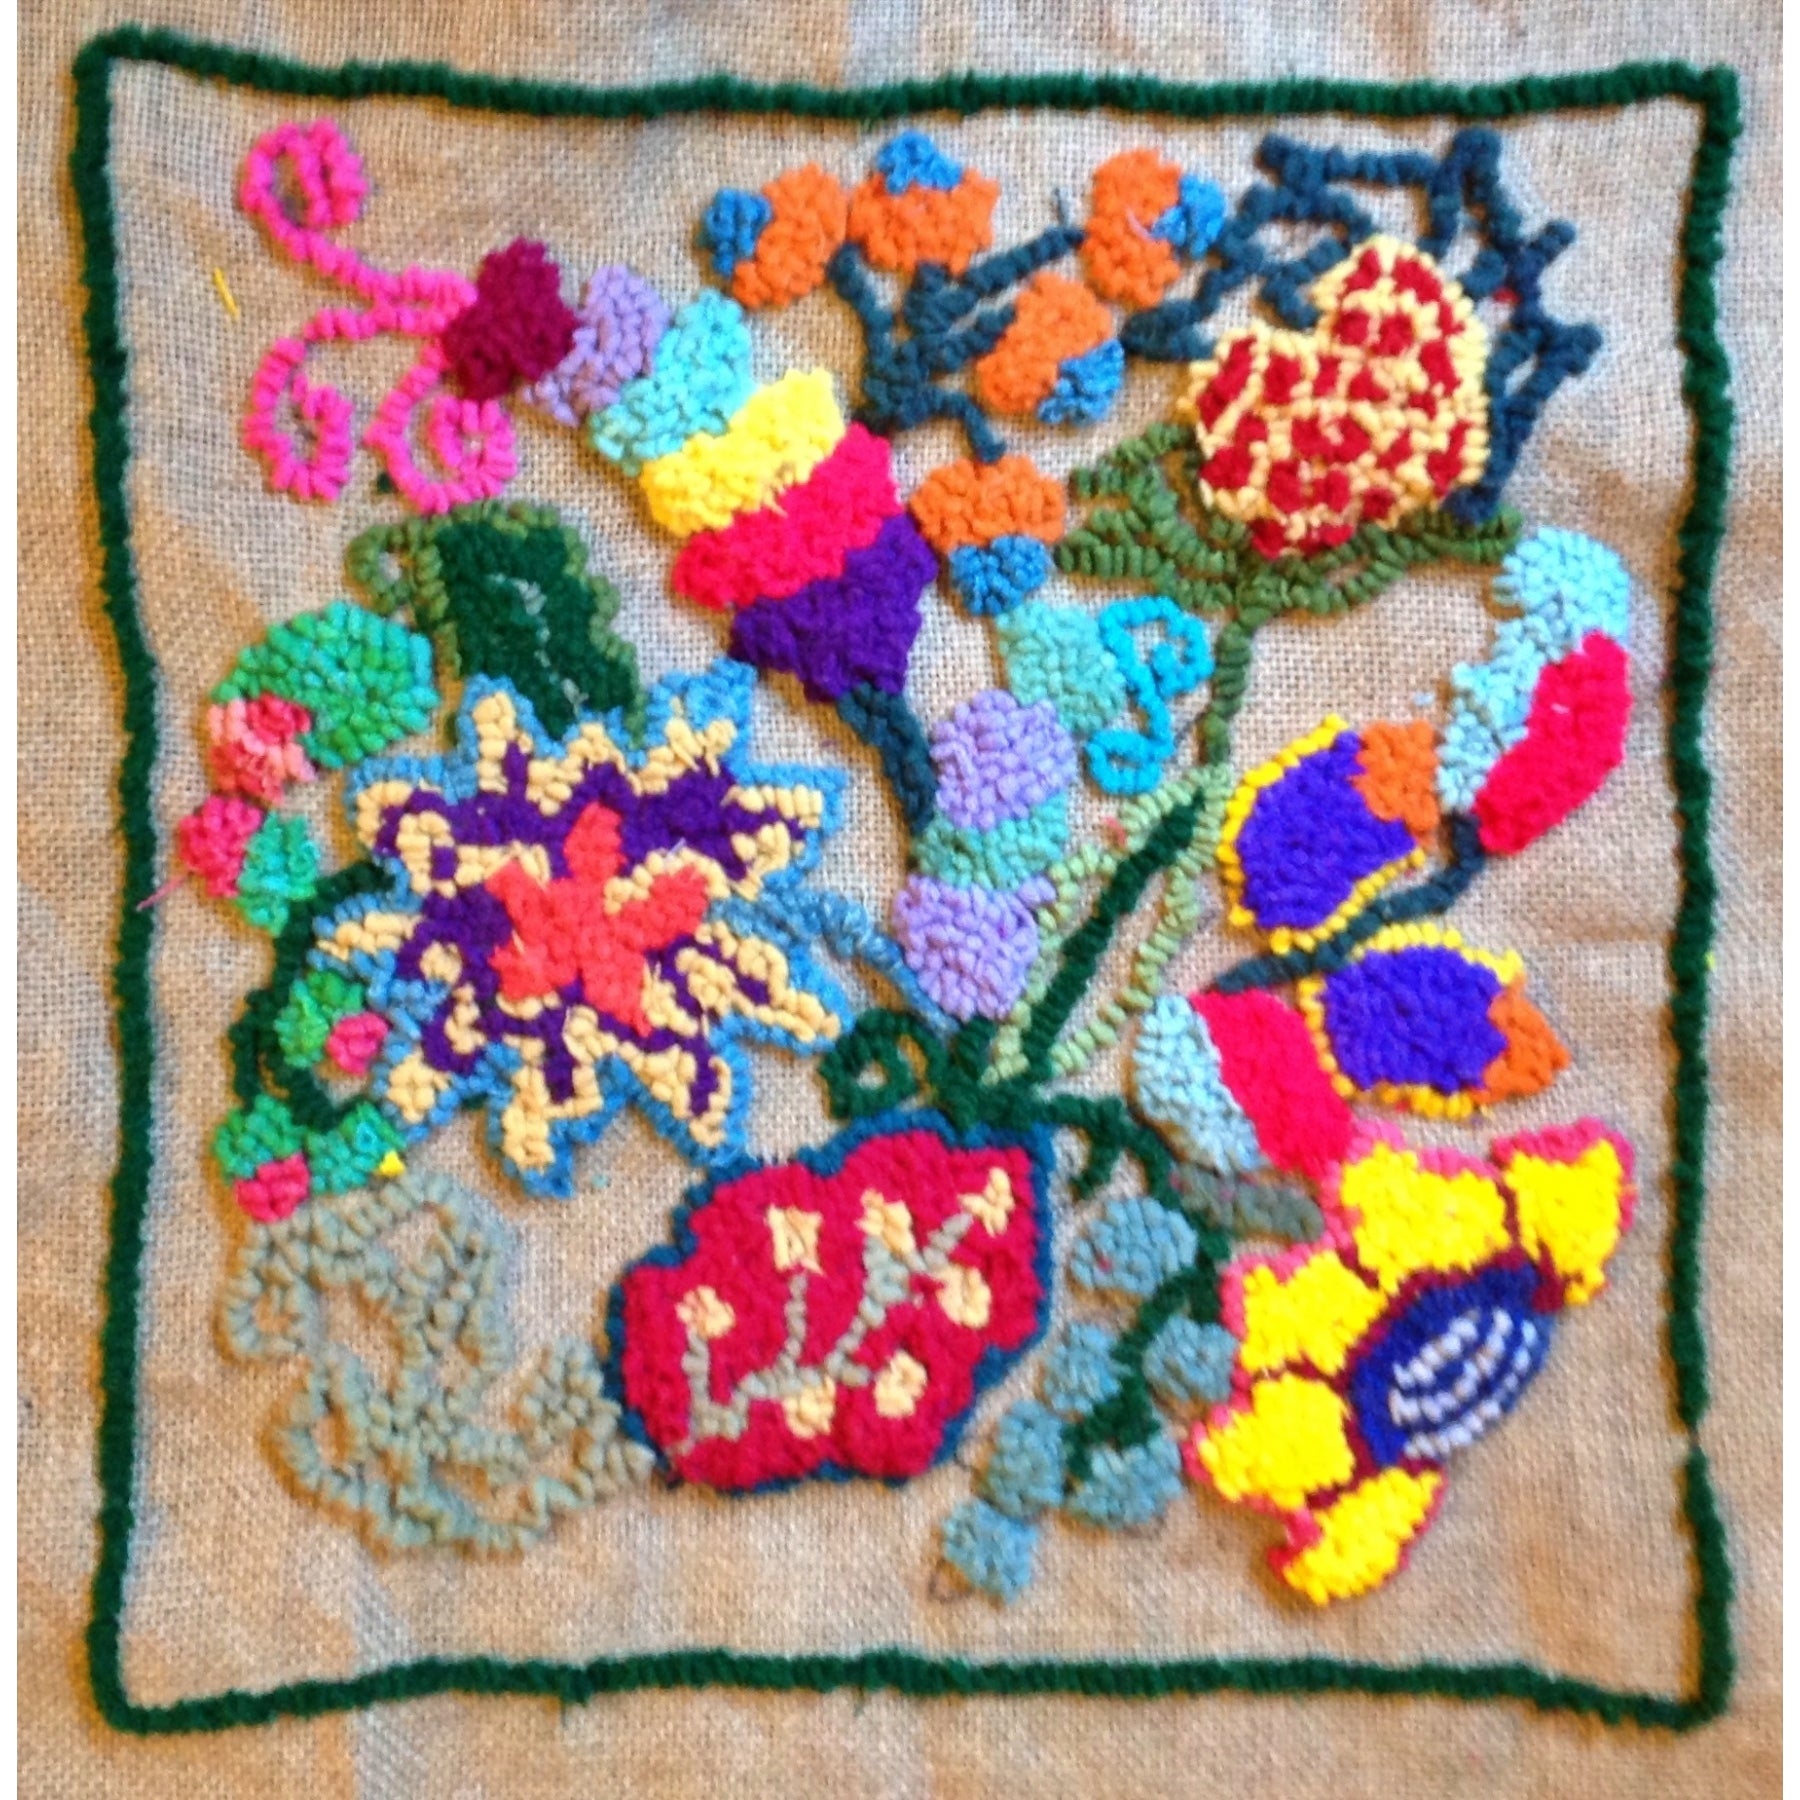 Hampden – Panel A, rug hooked by Naomi Levine